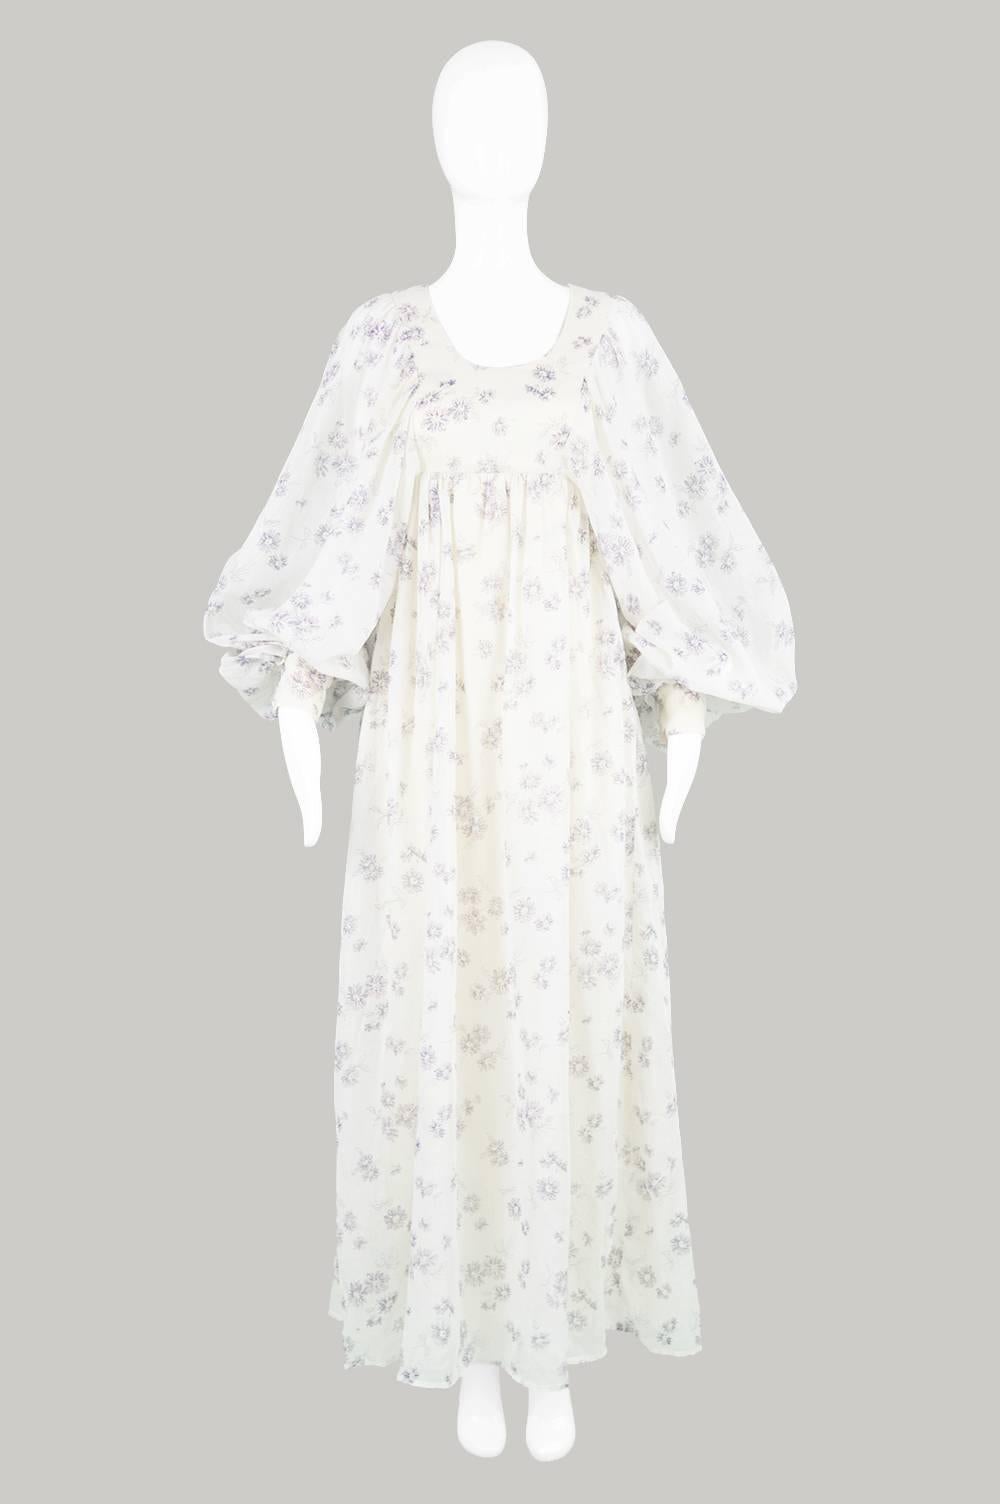 An absolute dream of a vintage bohemian dress, by British boutique label, Fiona Dresses. This breathaking gown is in a delicately floral printed, flowing, cotton voile with some of the biggest, most diaphanous balloon sleeves we've ever seen on a